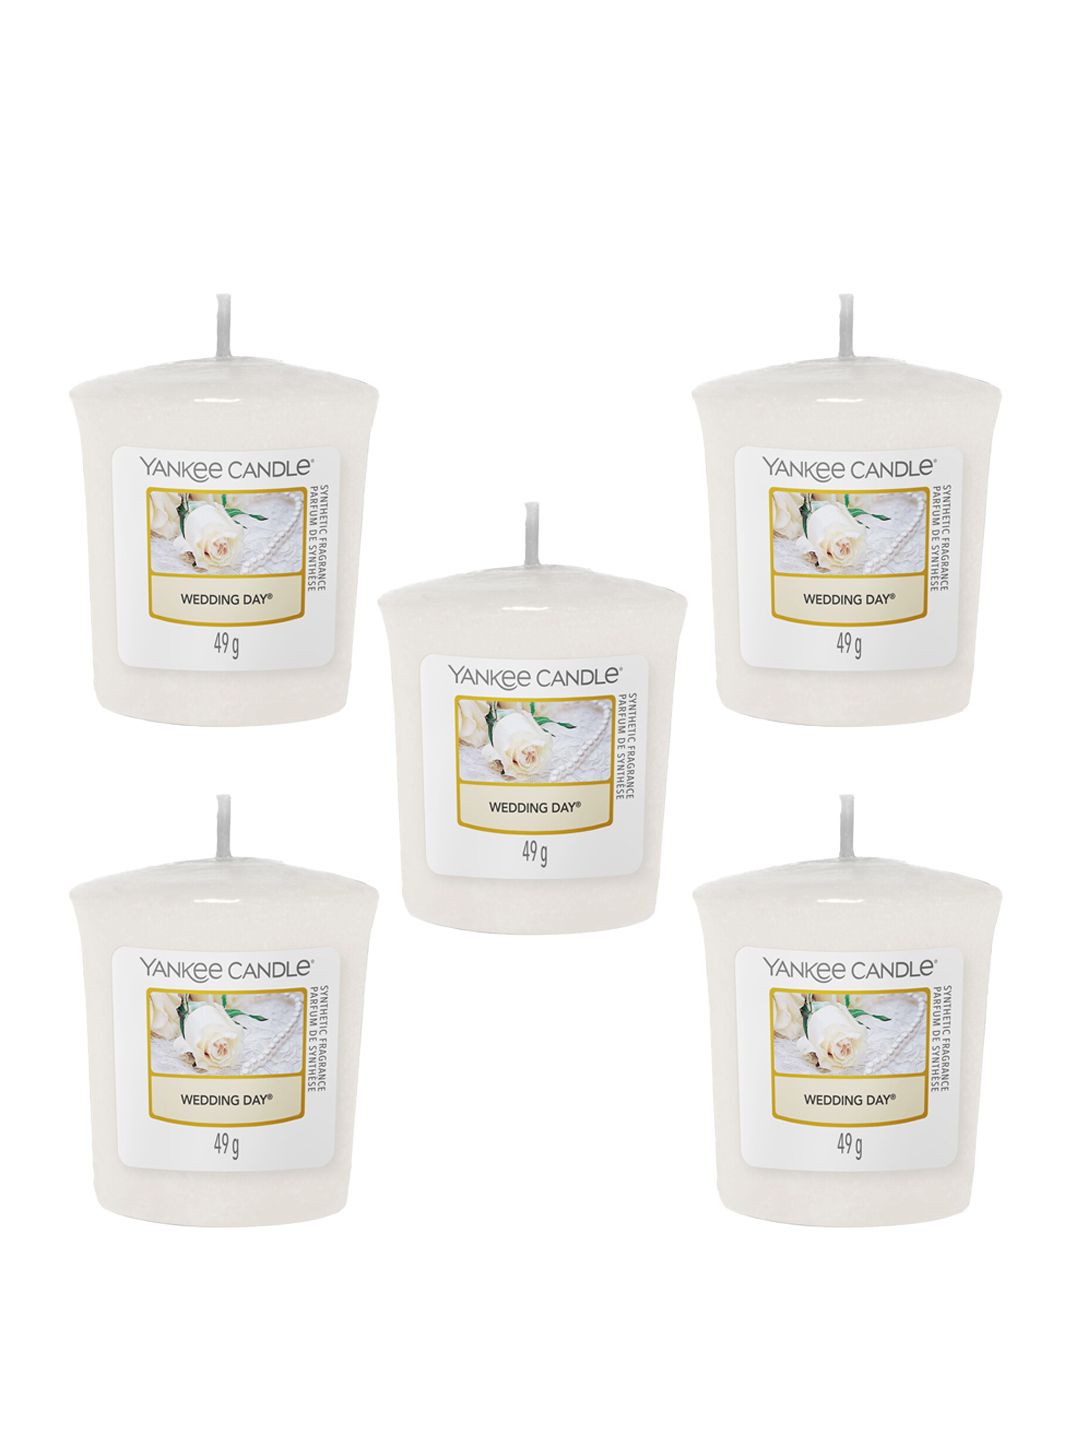 YANKEE CANDLE Set Of 5 Classic Votive Wedding Day Scented Candles Price in India